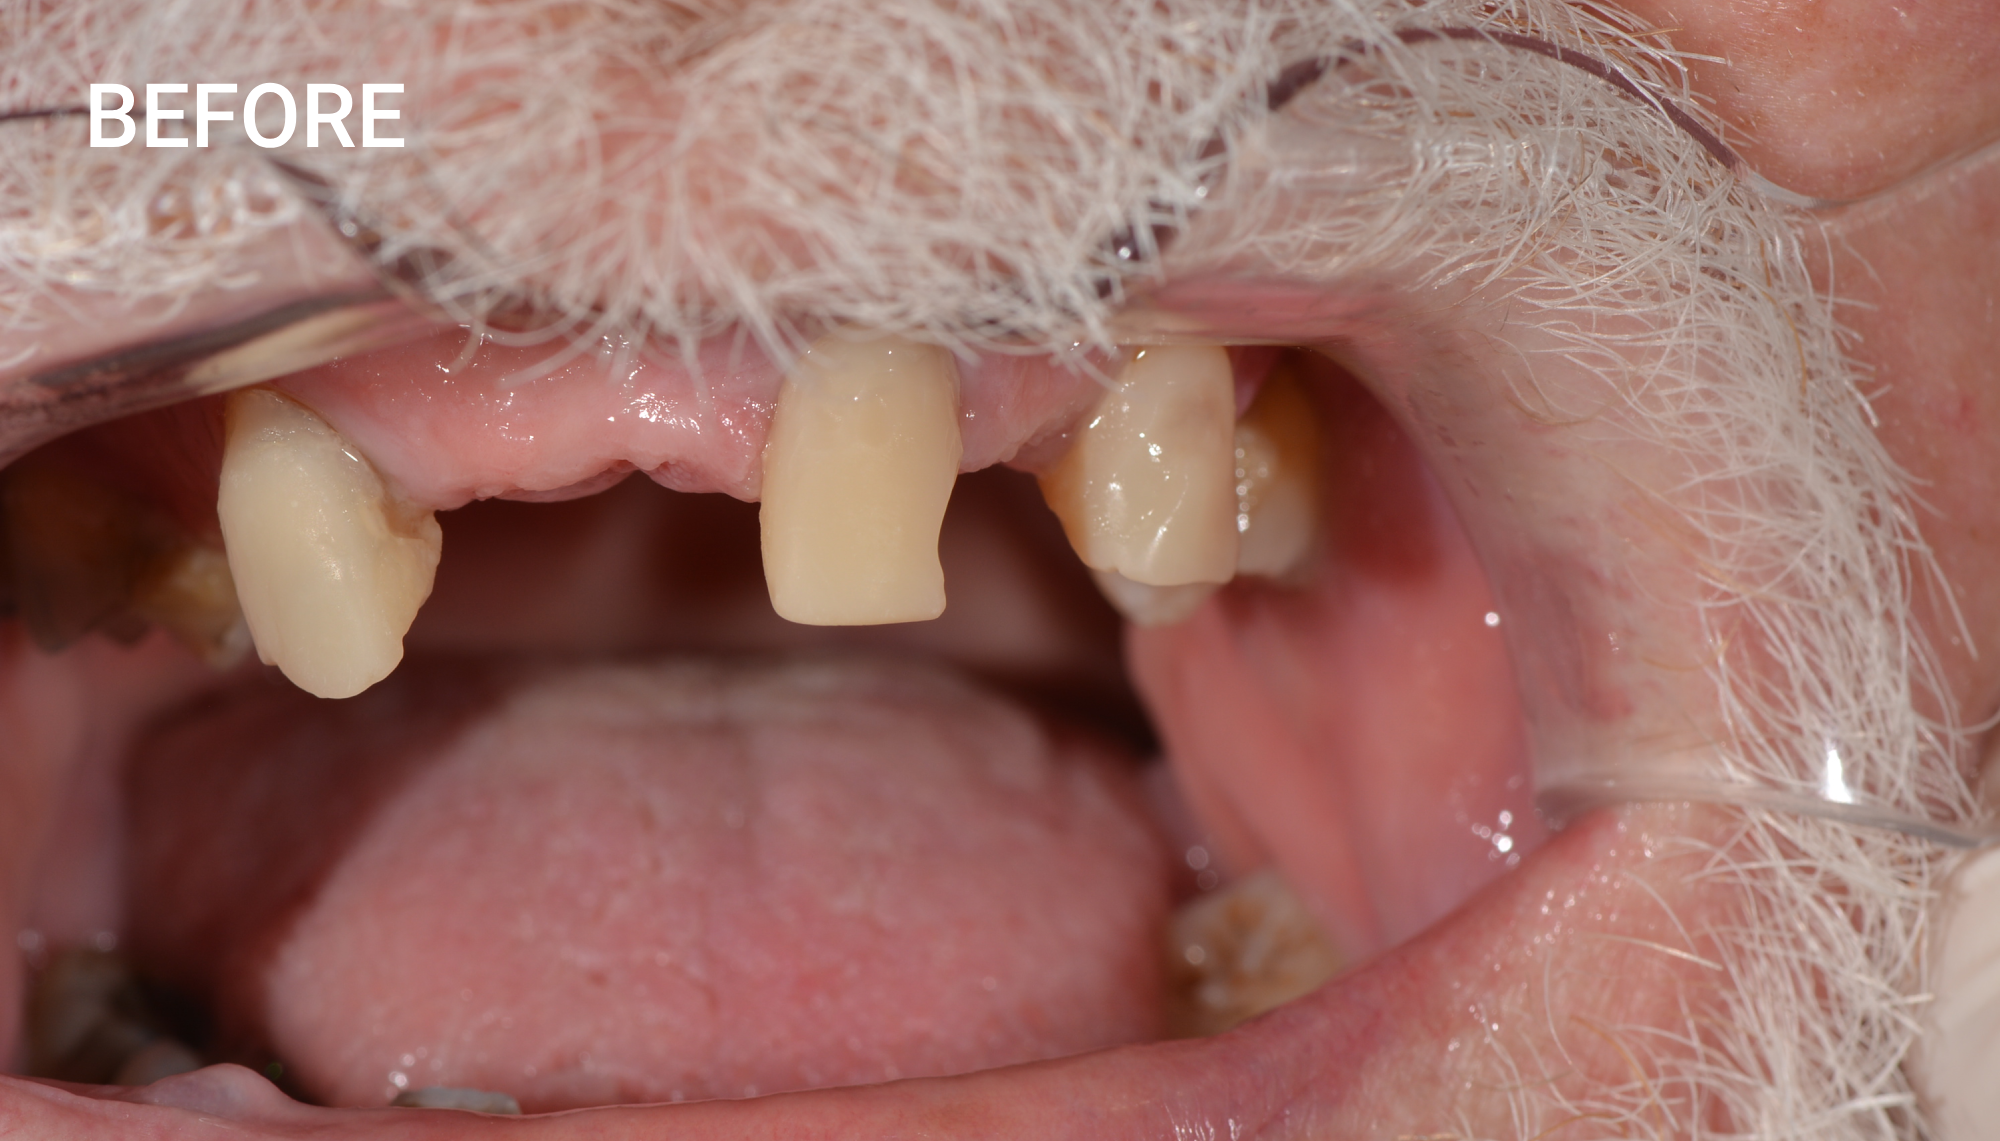 WORK COMPLETED BY DR. MICHAEL HARRIS (Dentist)